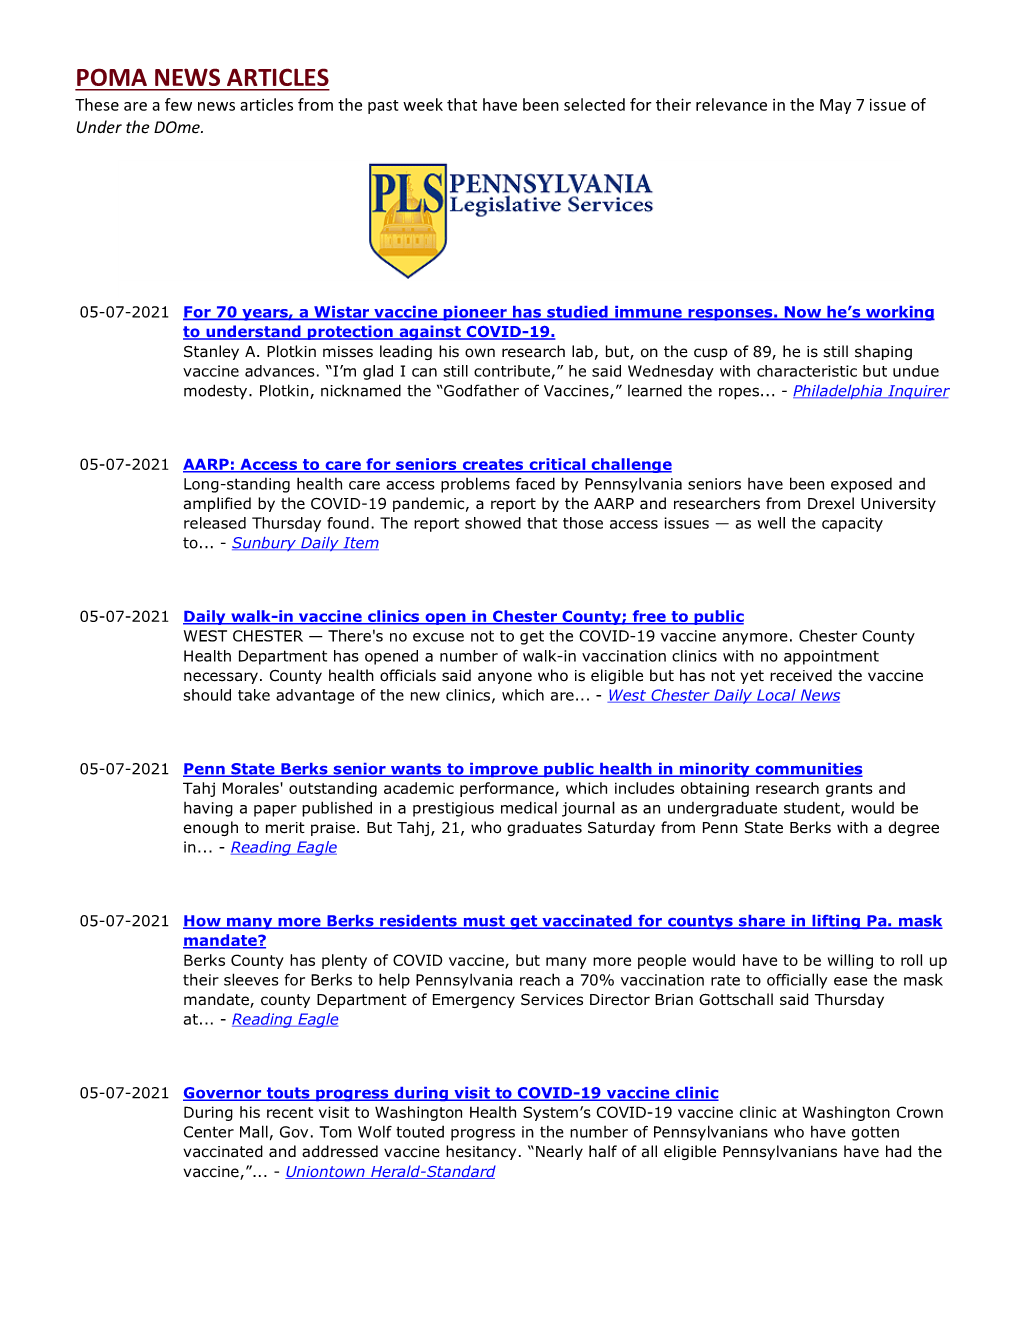 POMA NEWS ARTICLES These Are a Few News Articles from the Past Week That Have Been Selected for Their Relevance in the May 7 Issue of Under the Dome